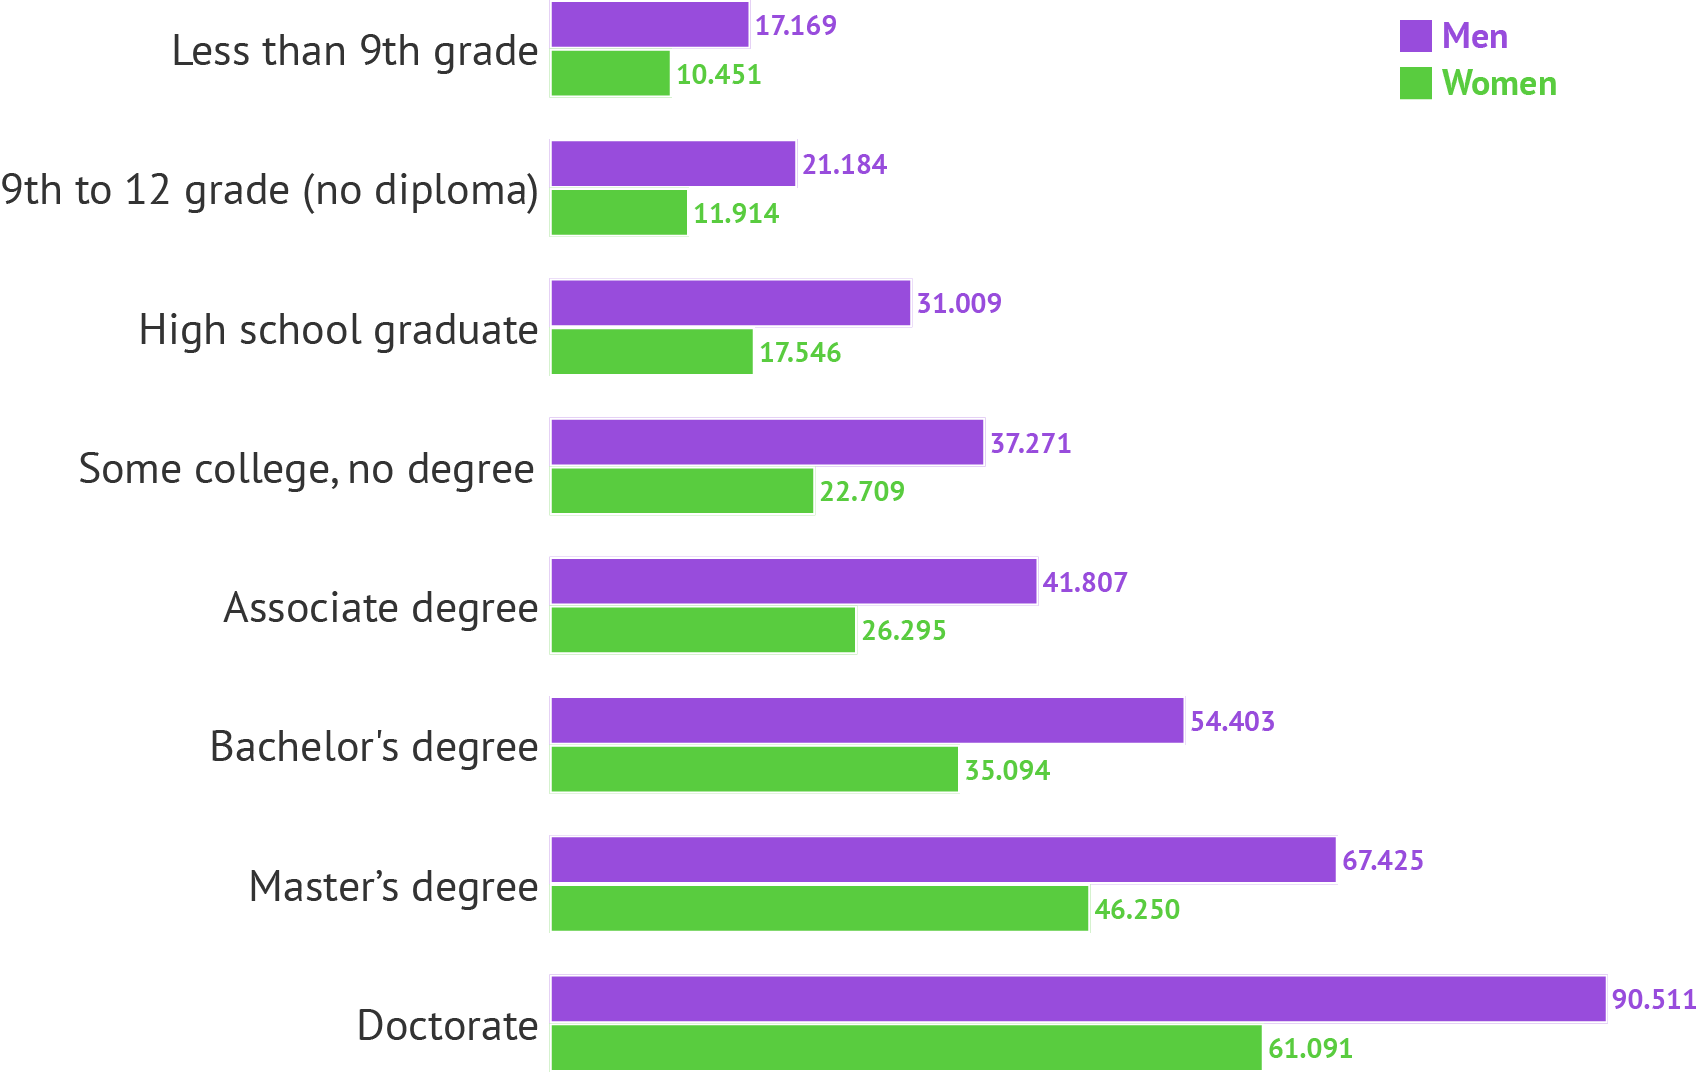 A bar chart with numbers for men and women, showing the pay gap for different eduction levels